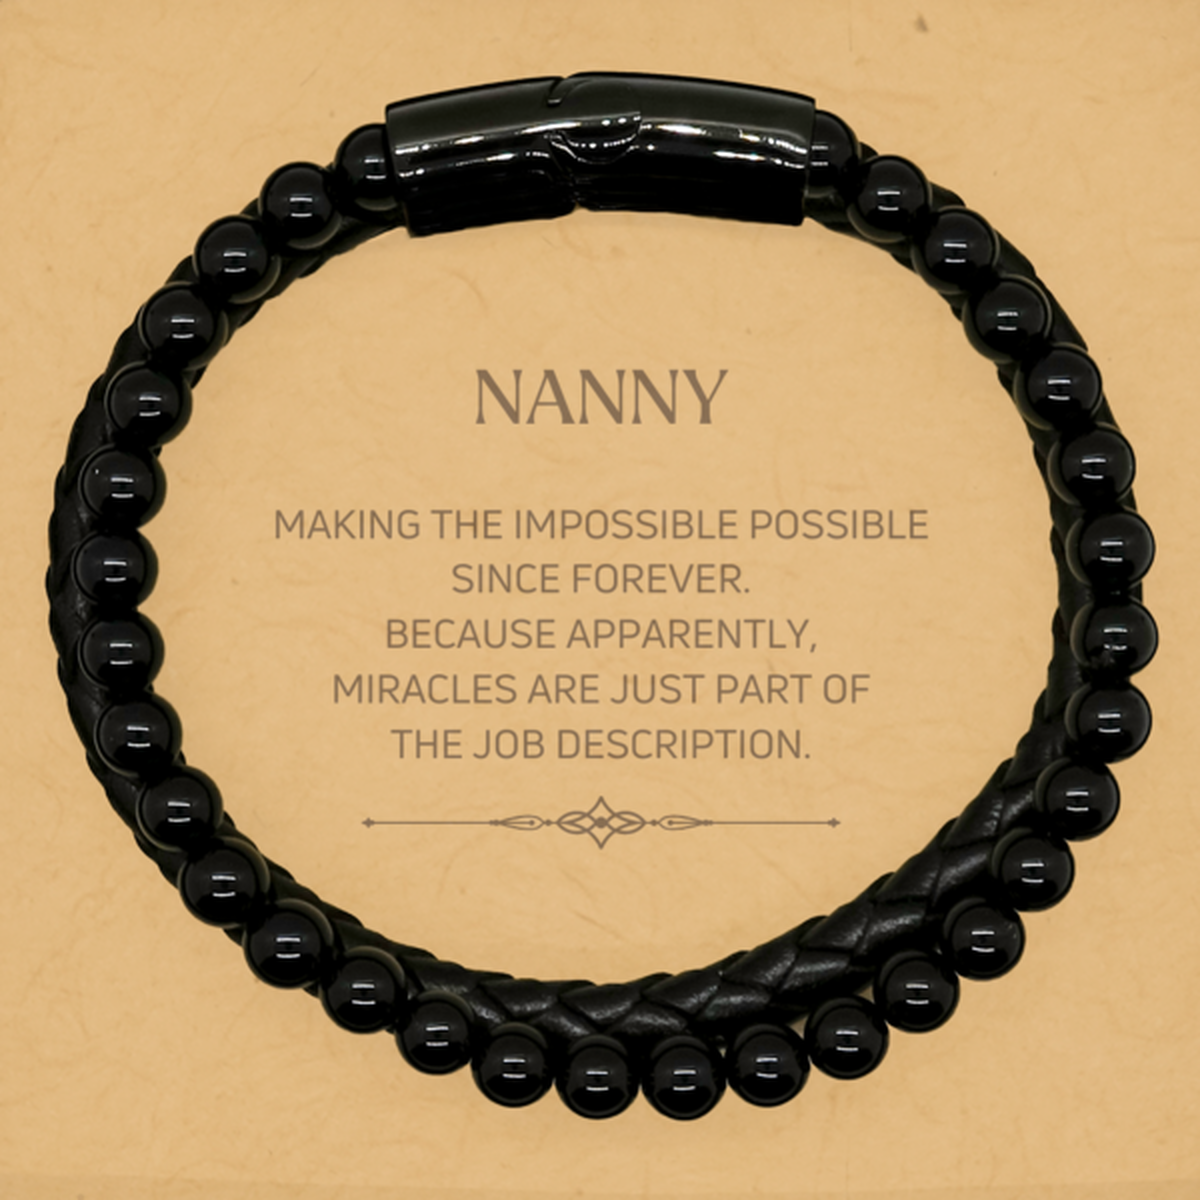 Funny Nanny Gifts, Miracles are just part of the job description, Inspirational Birthday Stone Leather Bracelets For Nanny, Men, Women, Coworkers, Friends, Boss